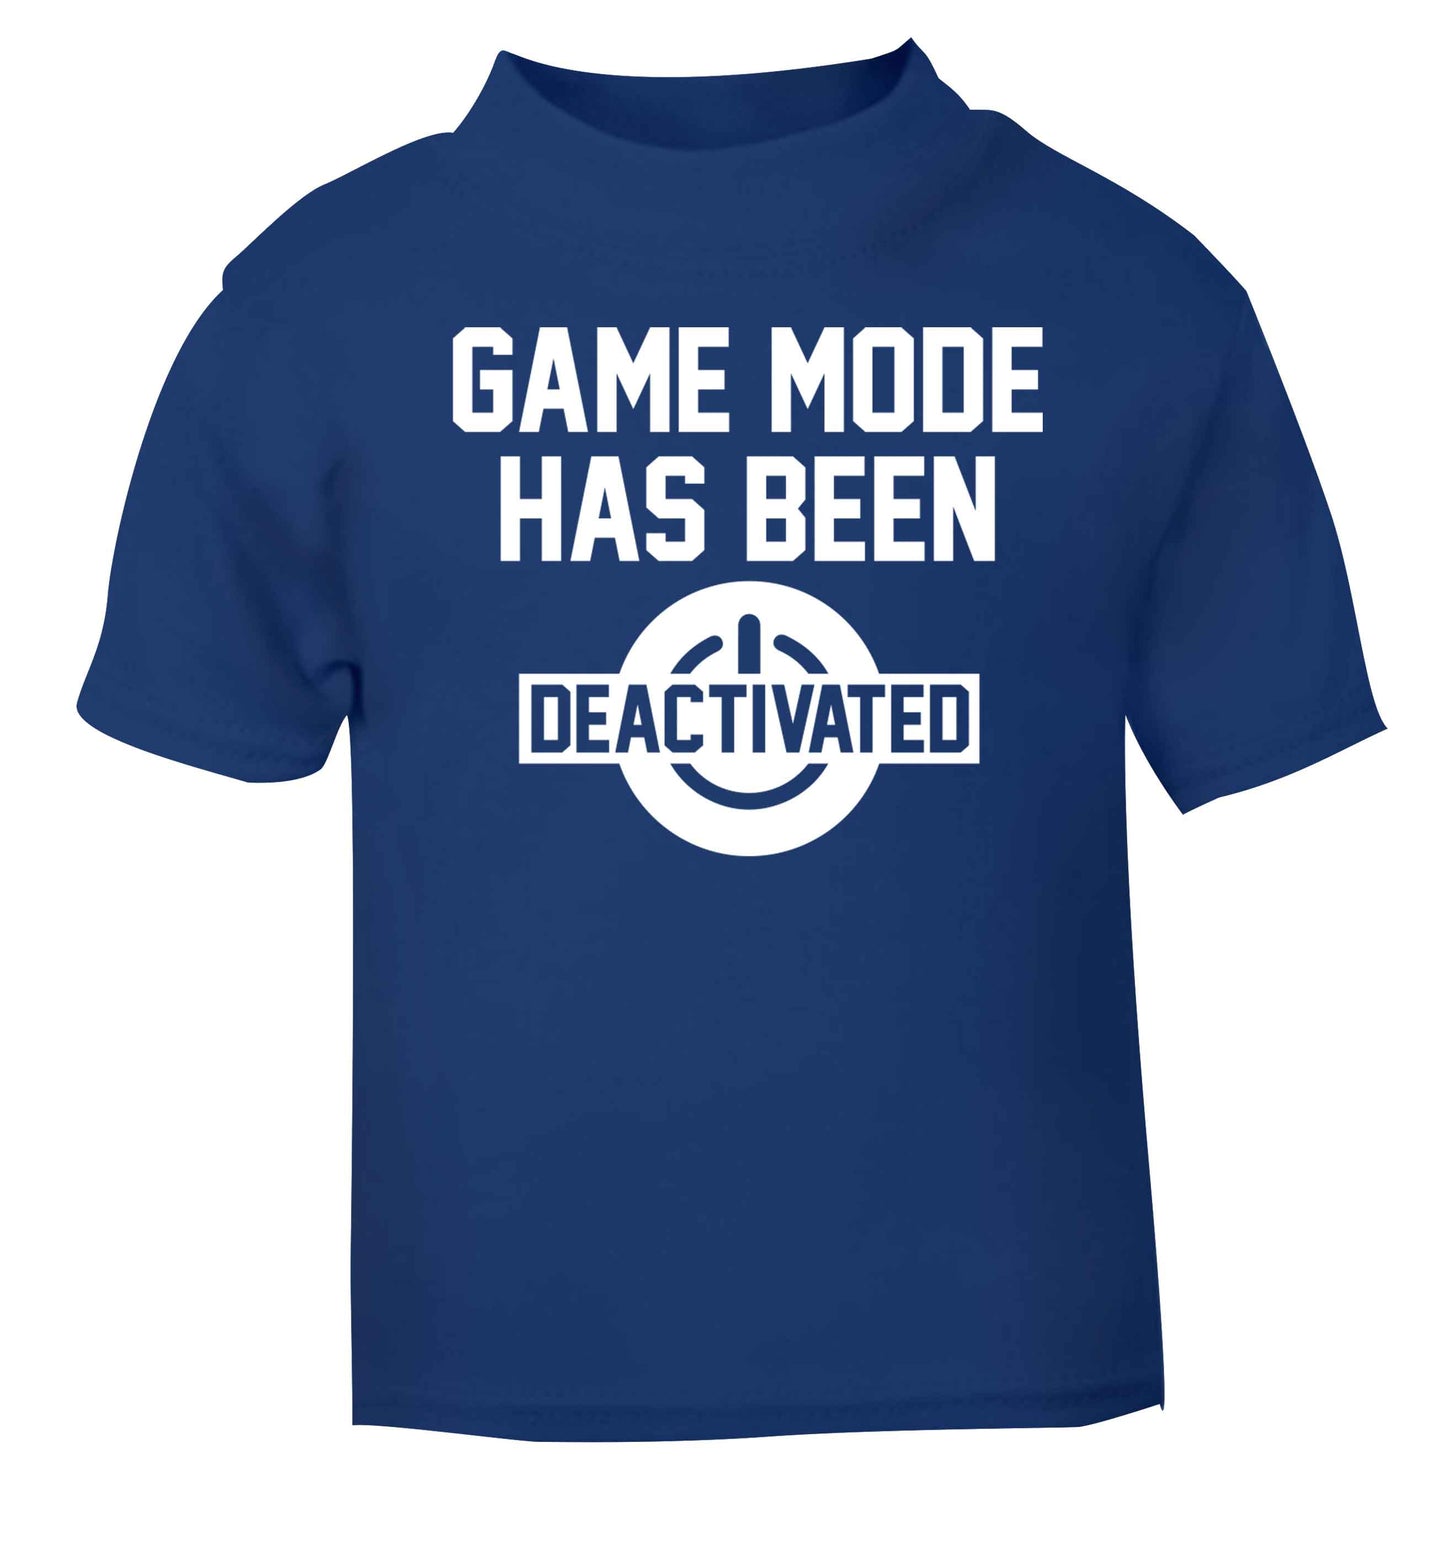 Game Mode Has Been Deactivated blue baby toddler Tshirt 2 Years